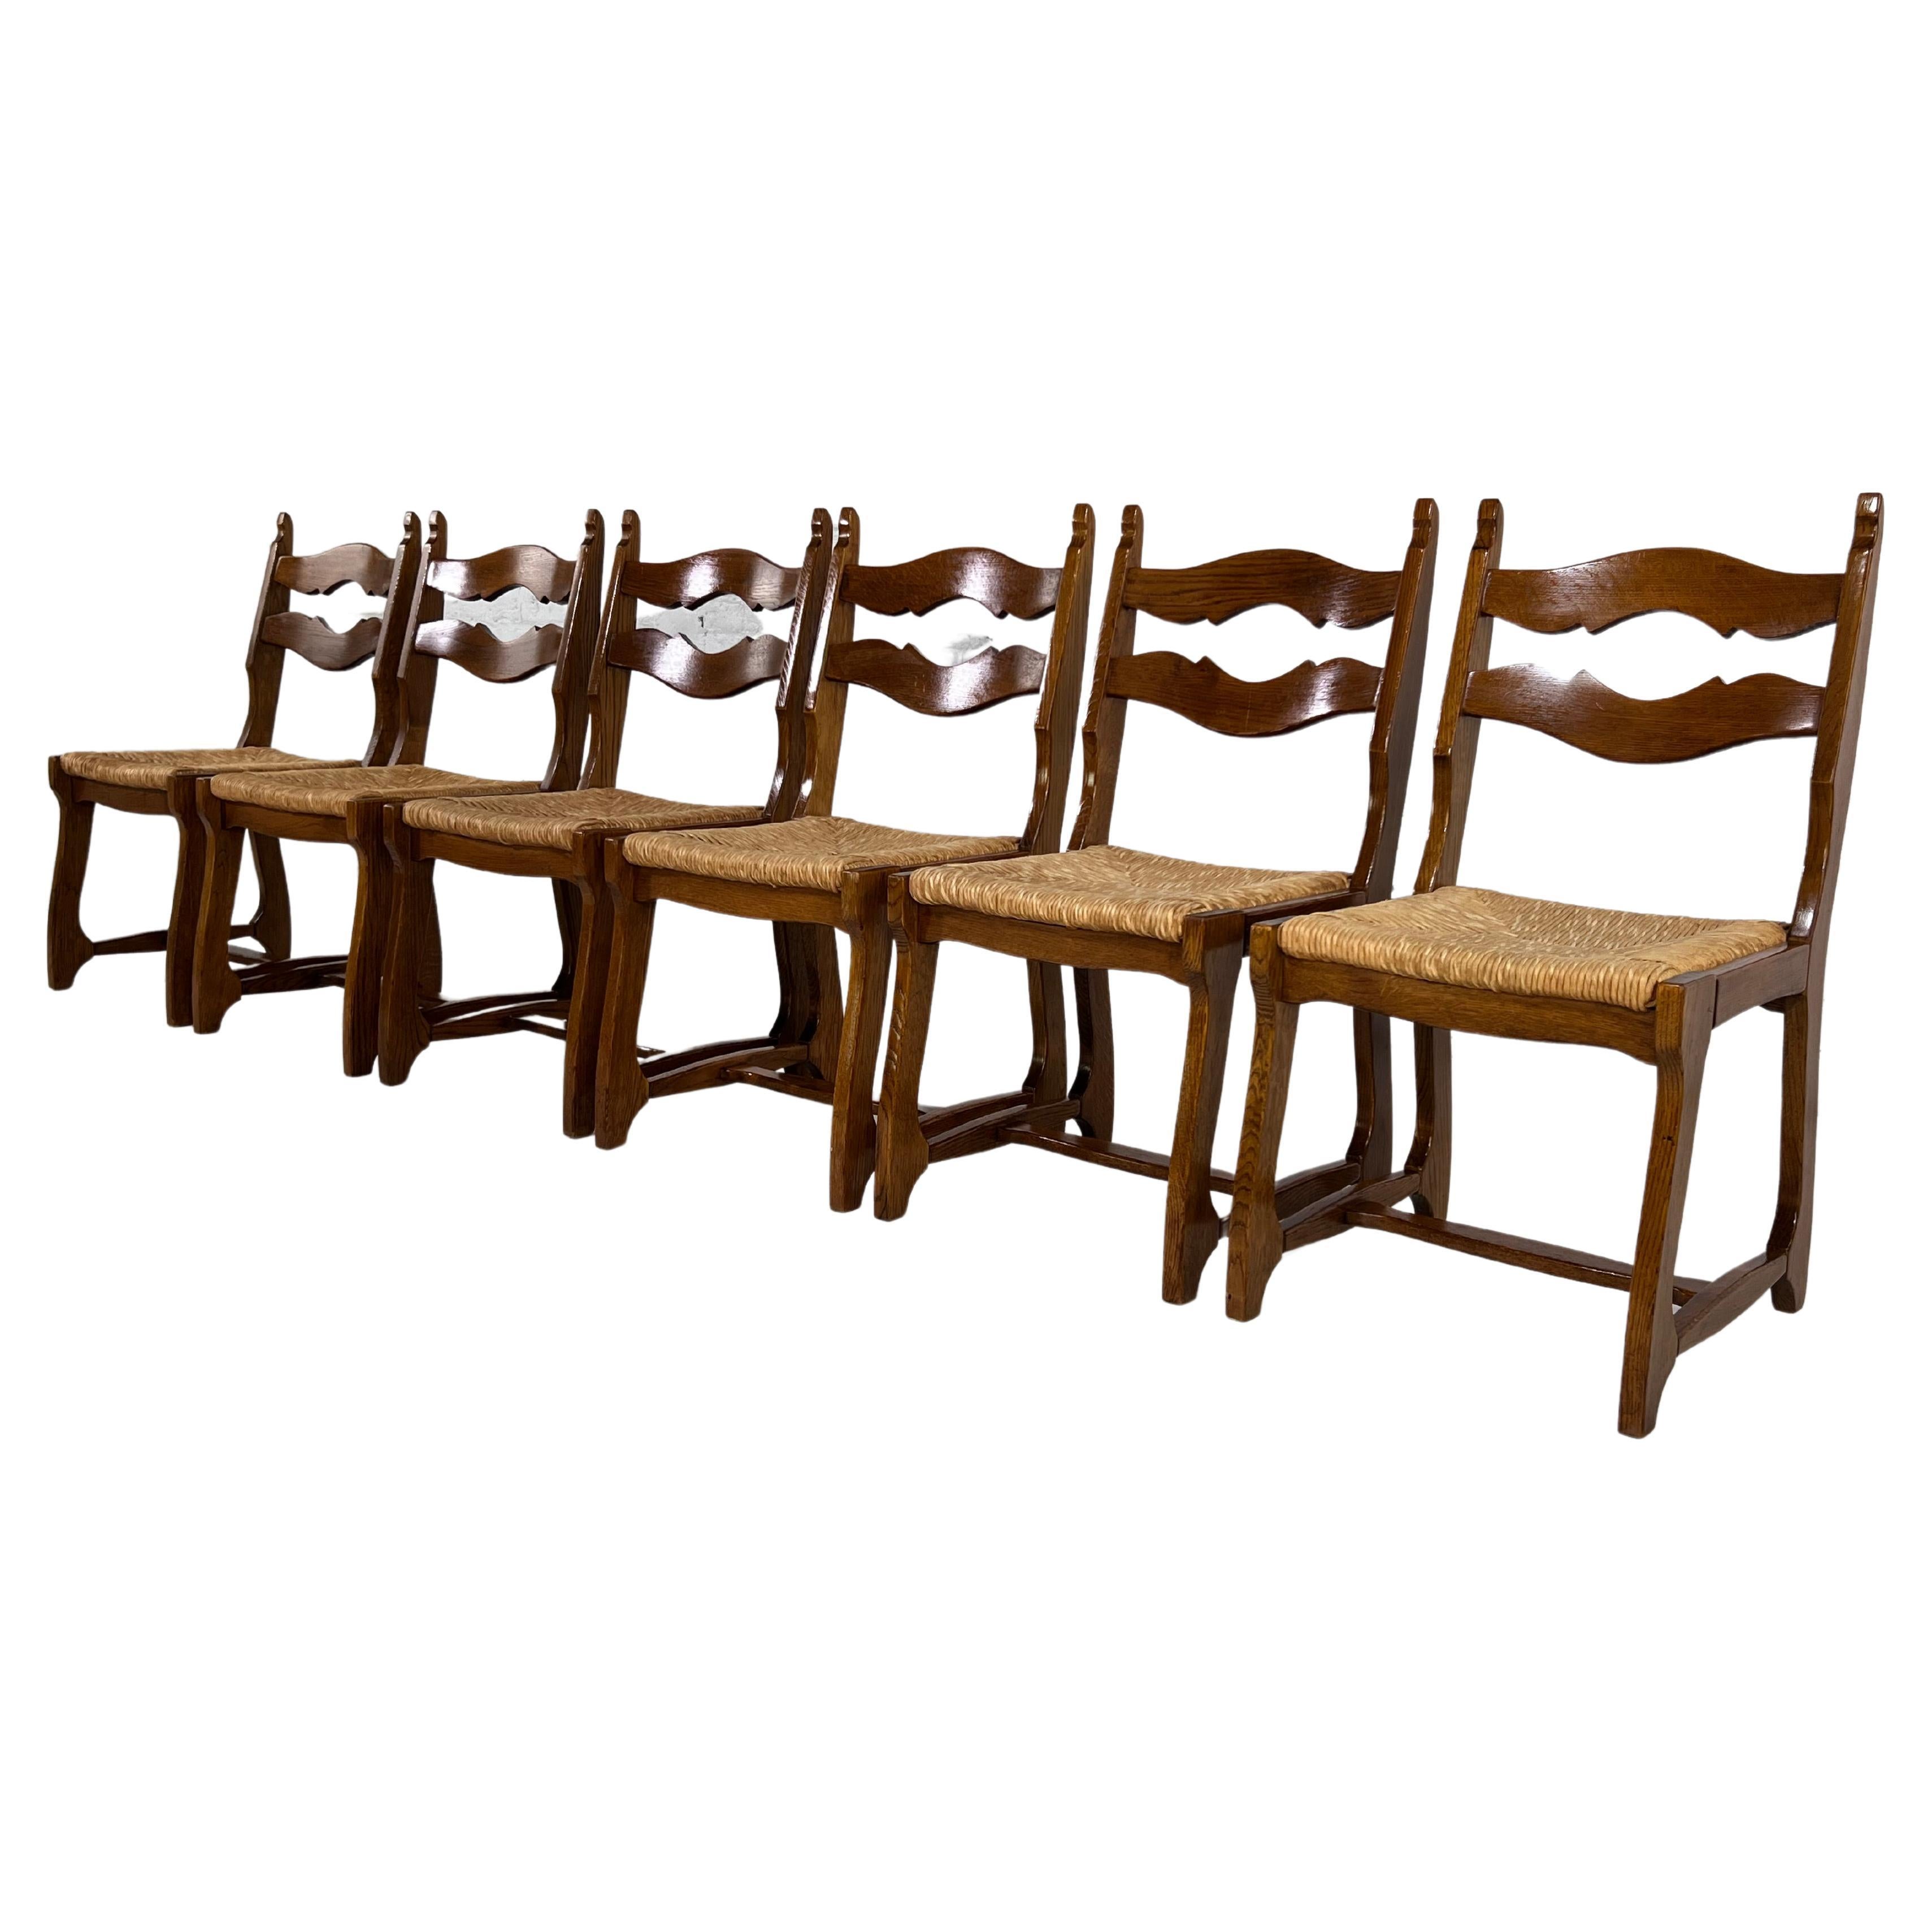 1950s Design Oak Wooden And Braided Straw Seats Set of 6 Chairs For Sale